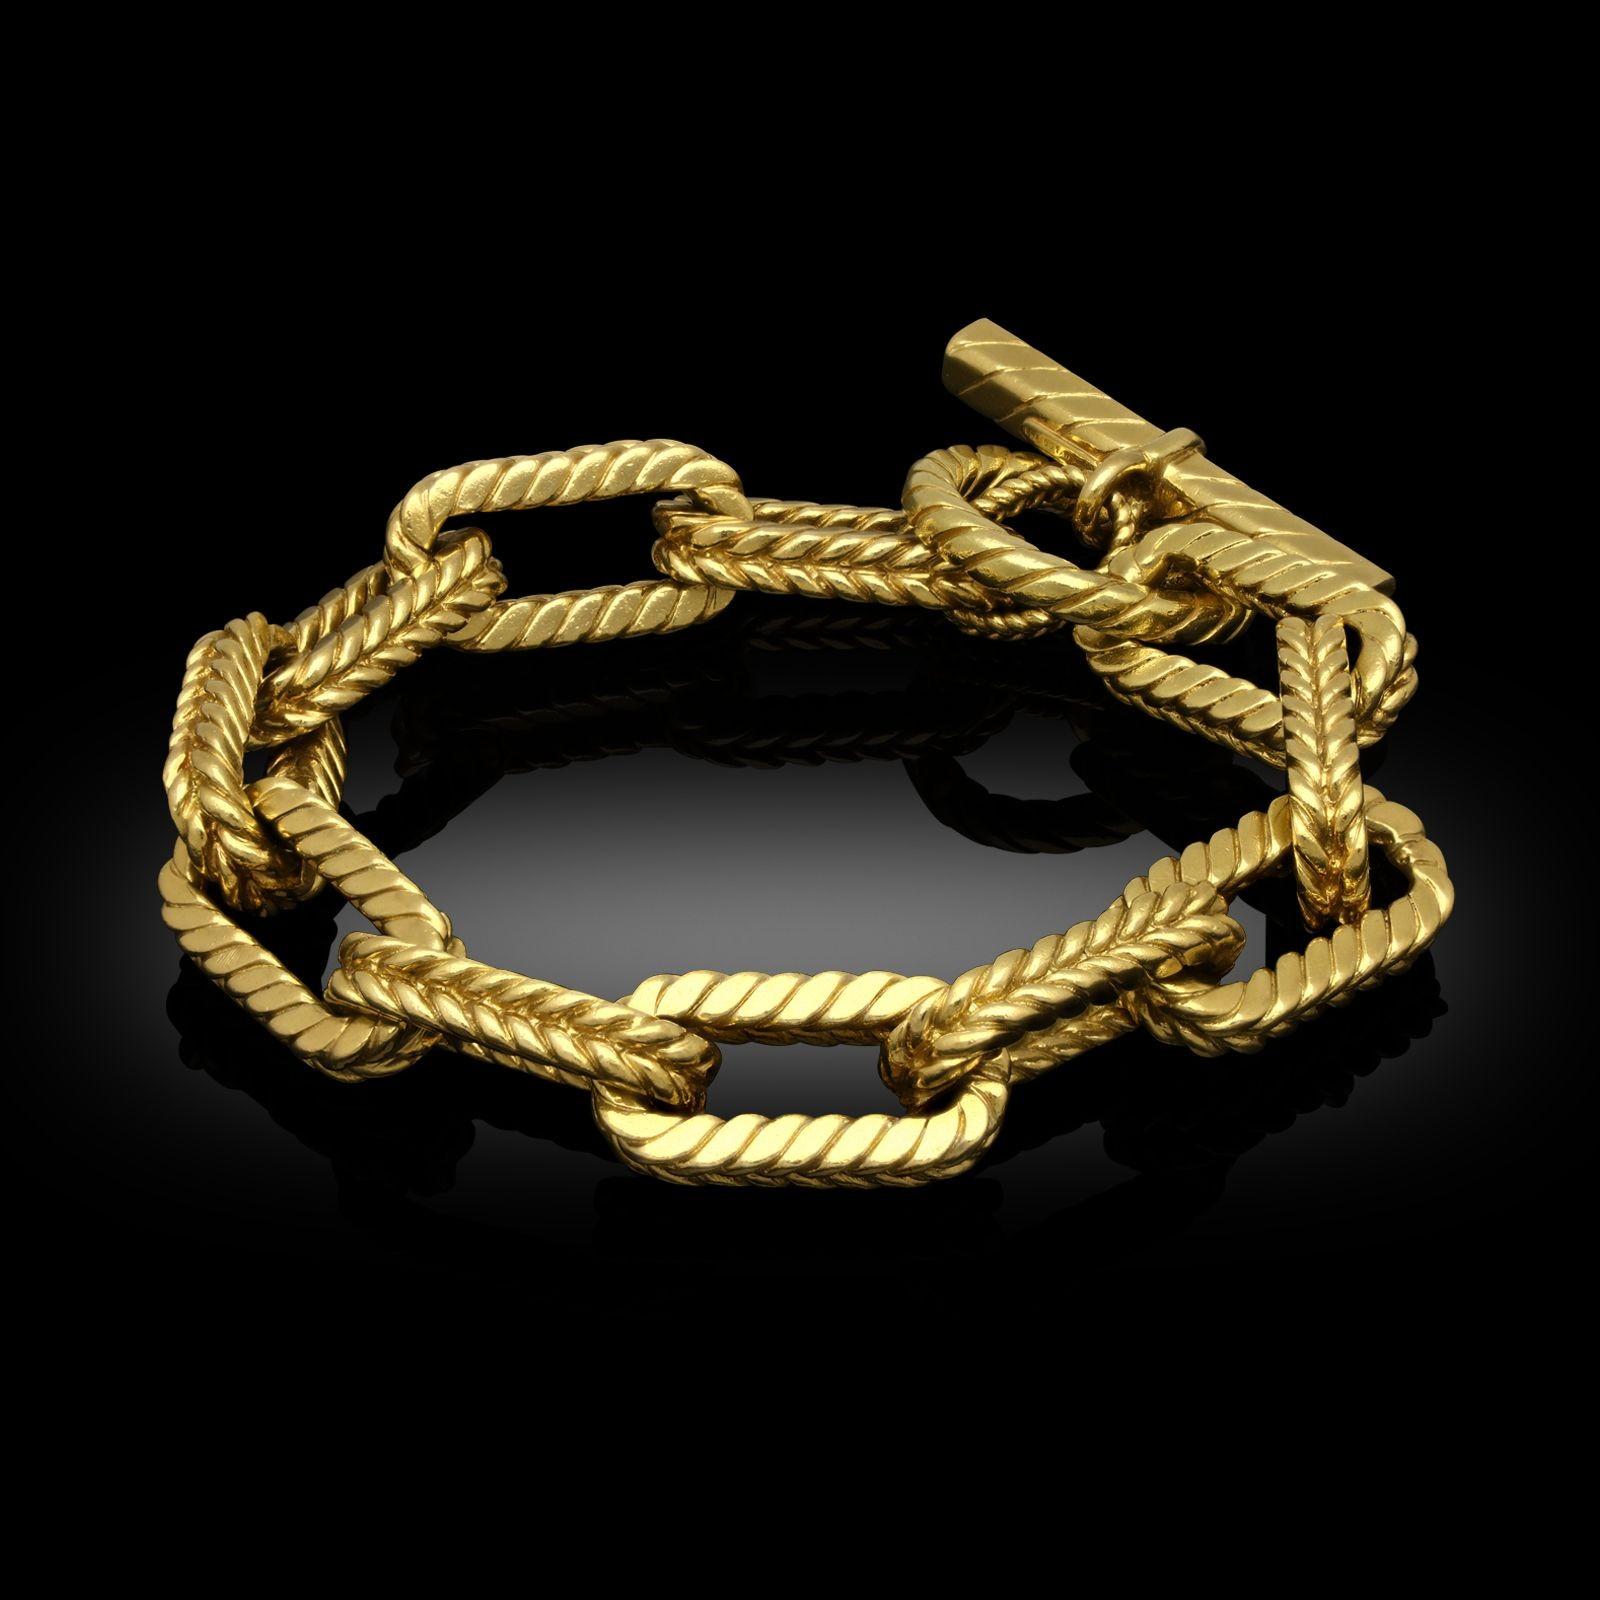 A vintage gold bracelet by Tiffany & Co. circa 1980s. The bracelet is designed as 18ct yellow gold rectangular anchor links (also known as the chaine d'ancre style.) Each link has a braided textured finish and is fastened with a loop and bar toggle